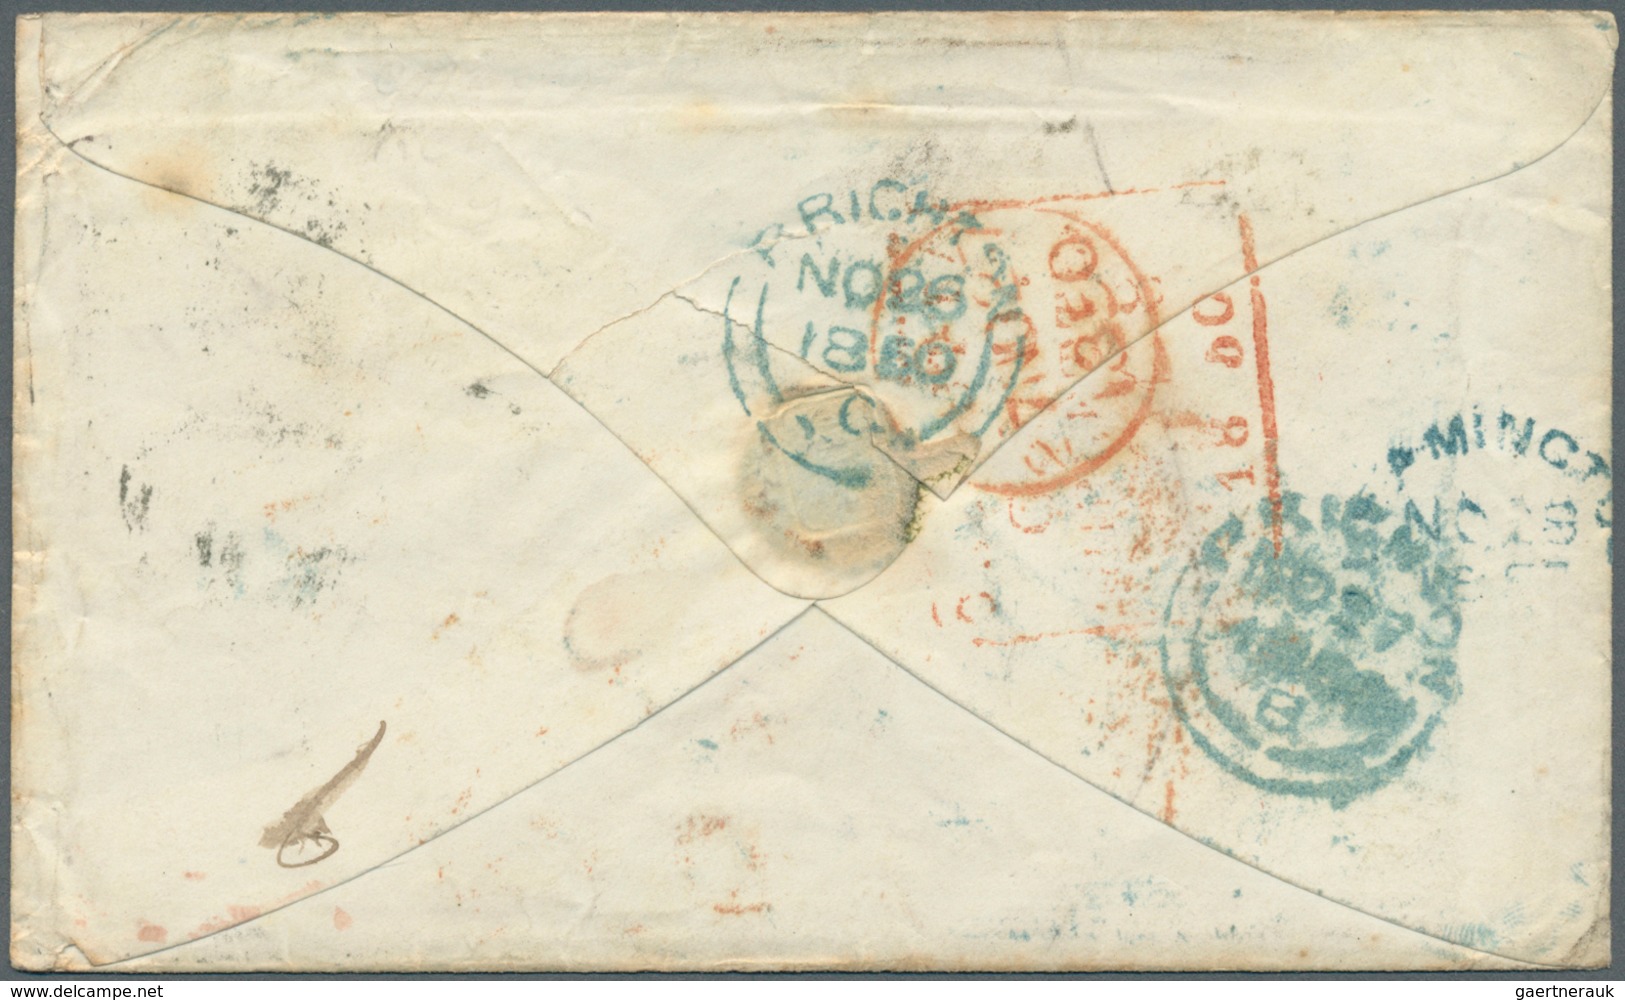 Indien: 1850 Cover From Calcutta To Brighton By Steamer "Haddington", Re-addressed On Arrival To Lea - 1852 District De Scinde